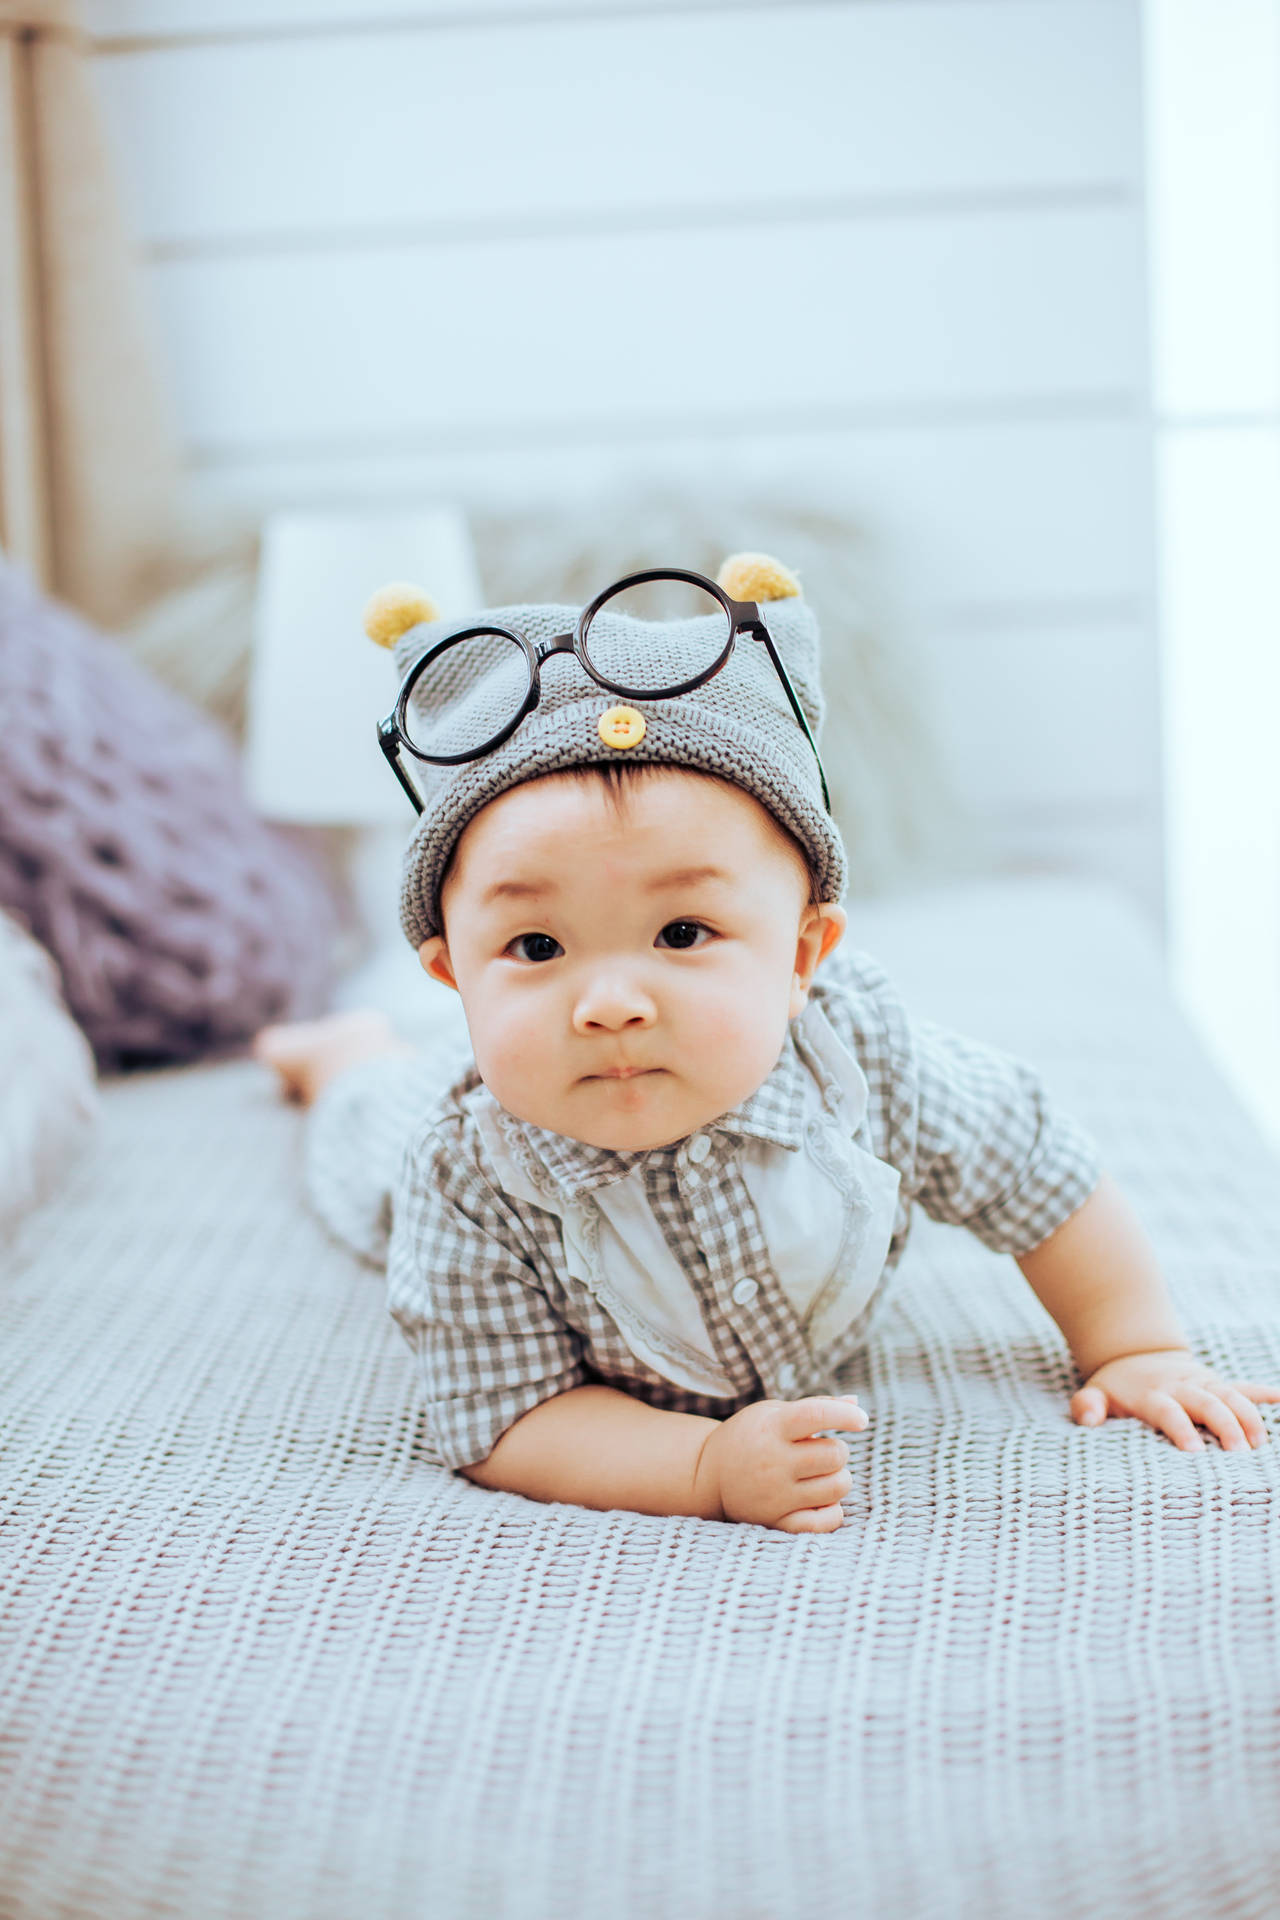 Download Cute Baby On Bed With Eyeglasses Wallpaper 